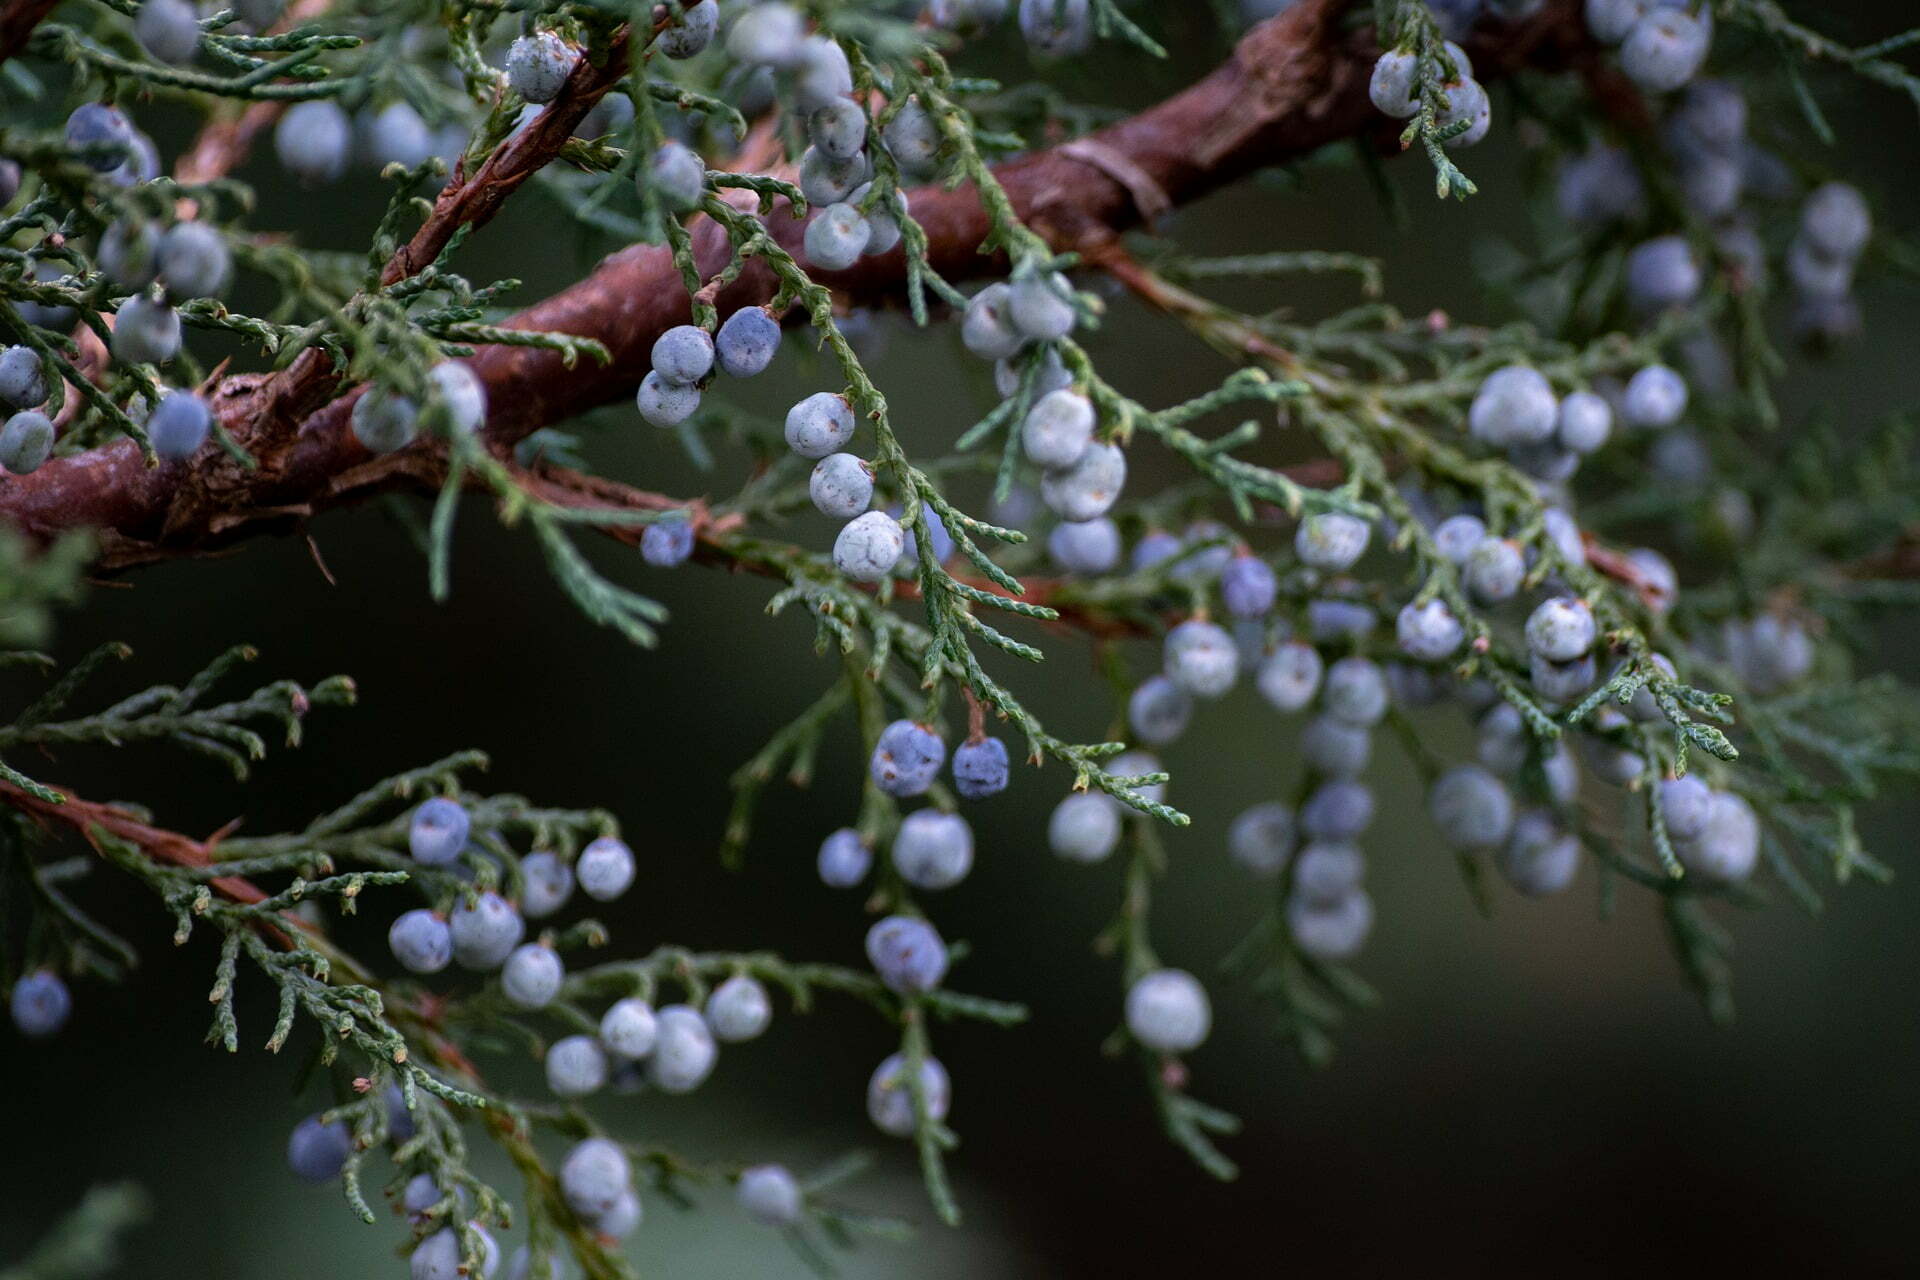 juniper gd73a6dd6d 1920 2 Billion People Suffer From Malnutrition - These Plants Can Help